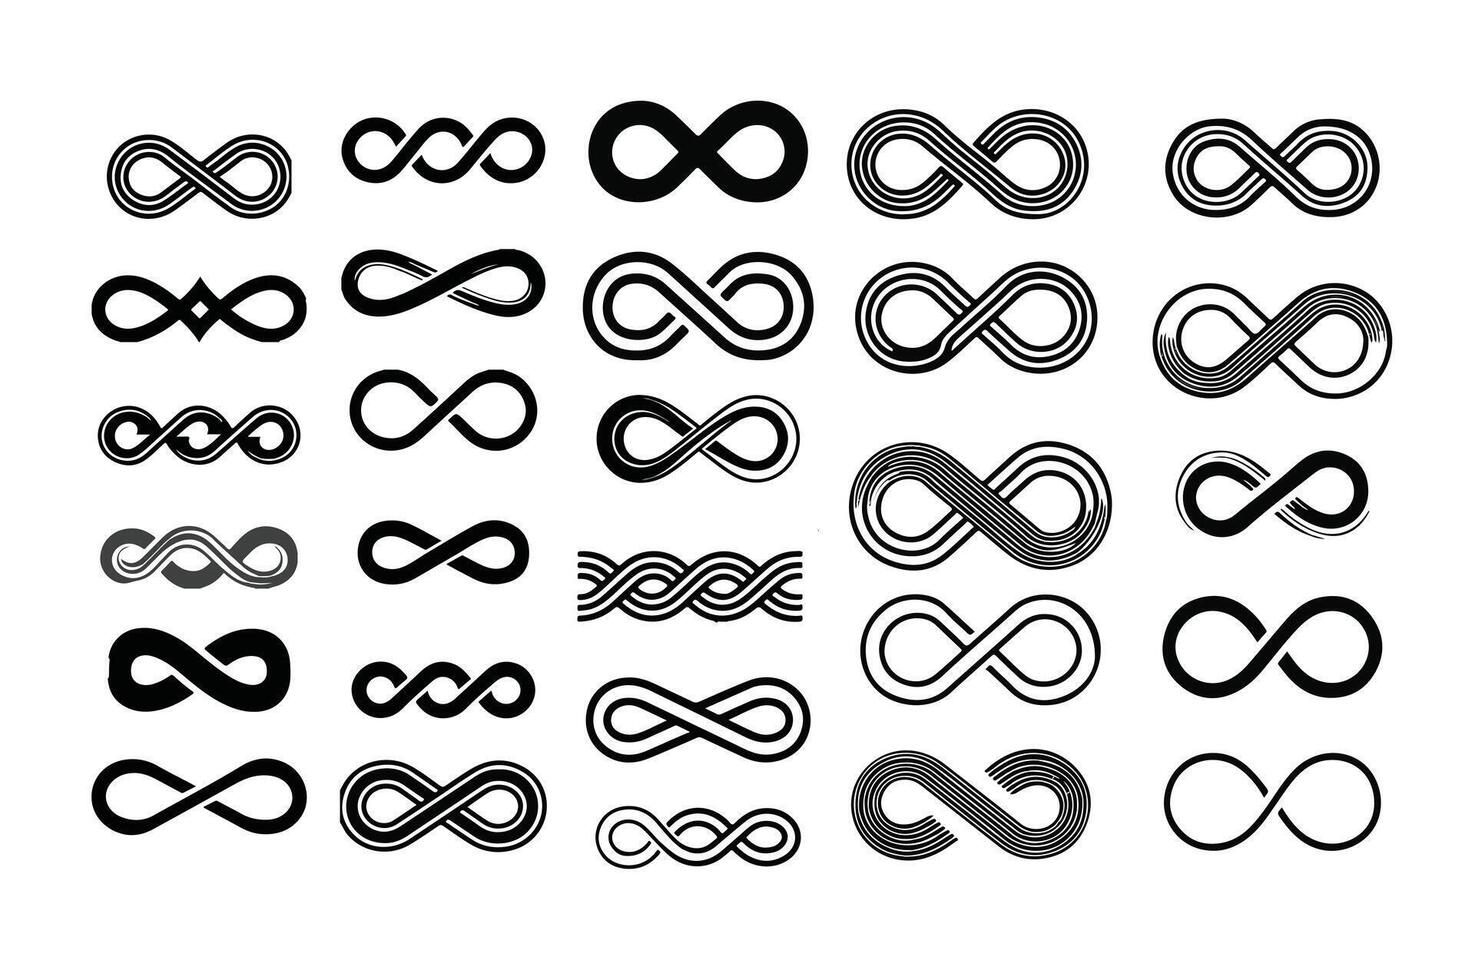 Unique and professional Set of infinity symbols set. Infinity symbol set, Infinity symbol collection. Pro icon logos set. Black co ntours of different shapes, thickness and style isolated on white. vector